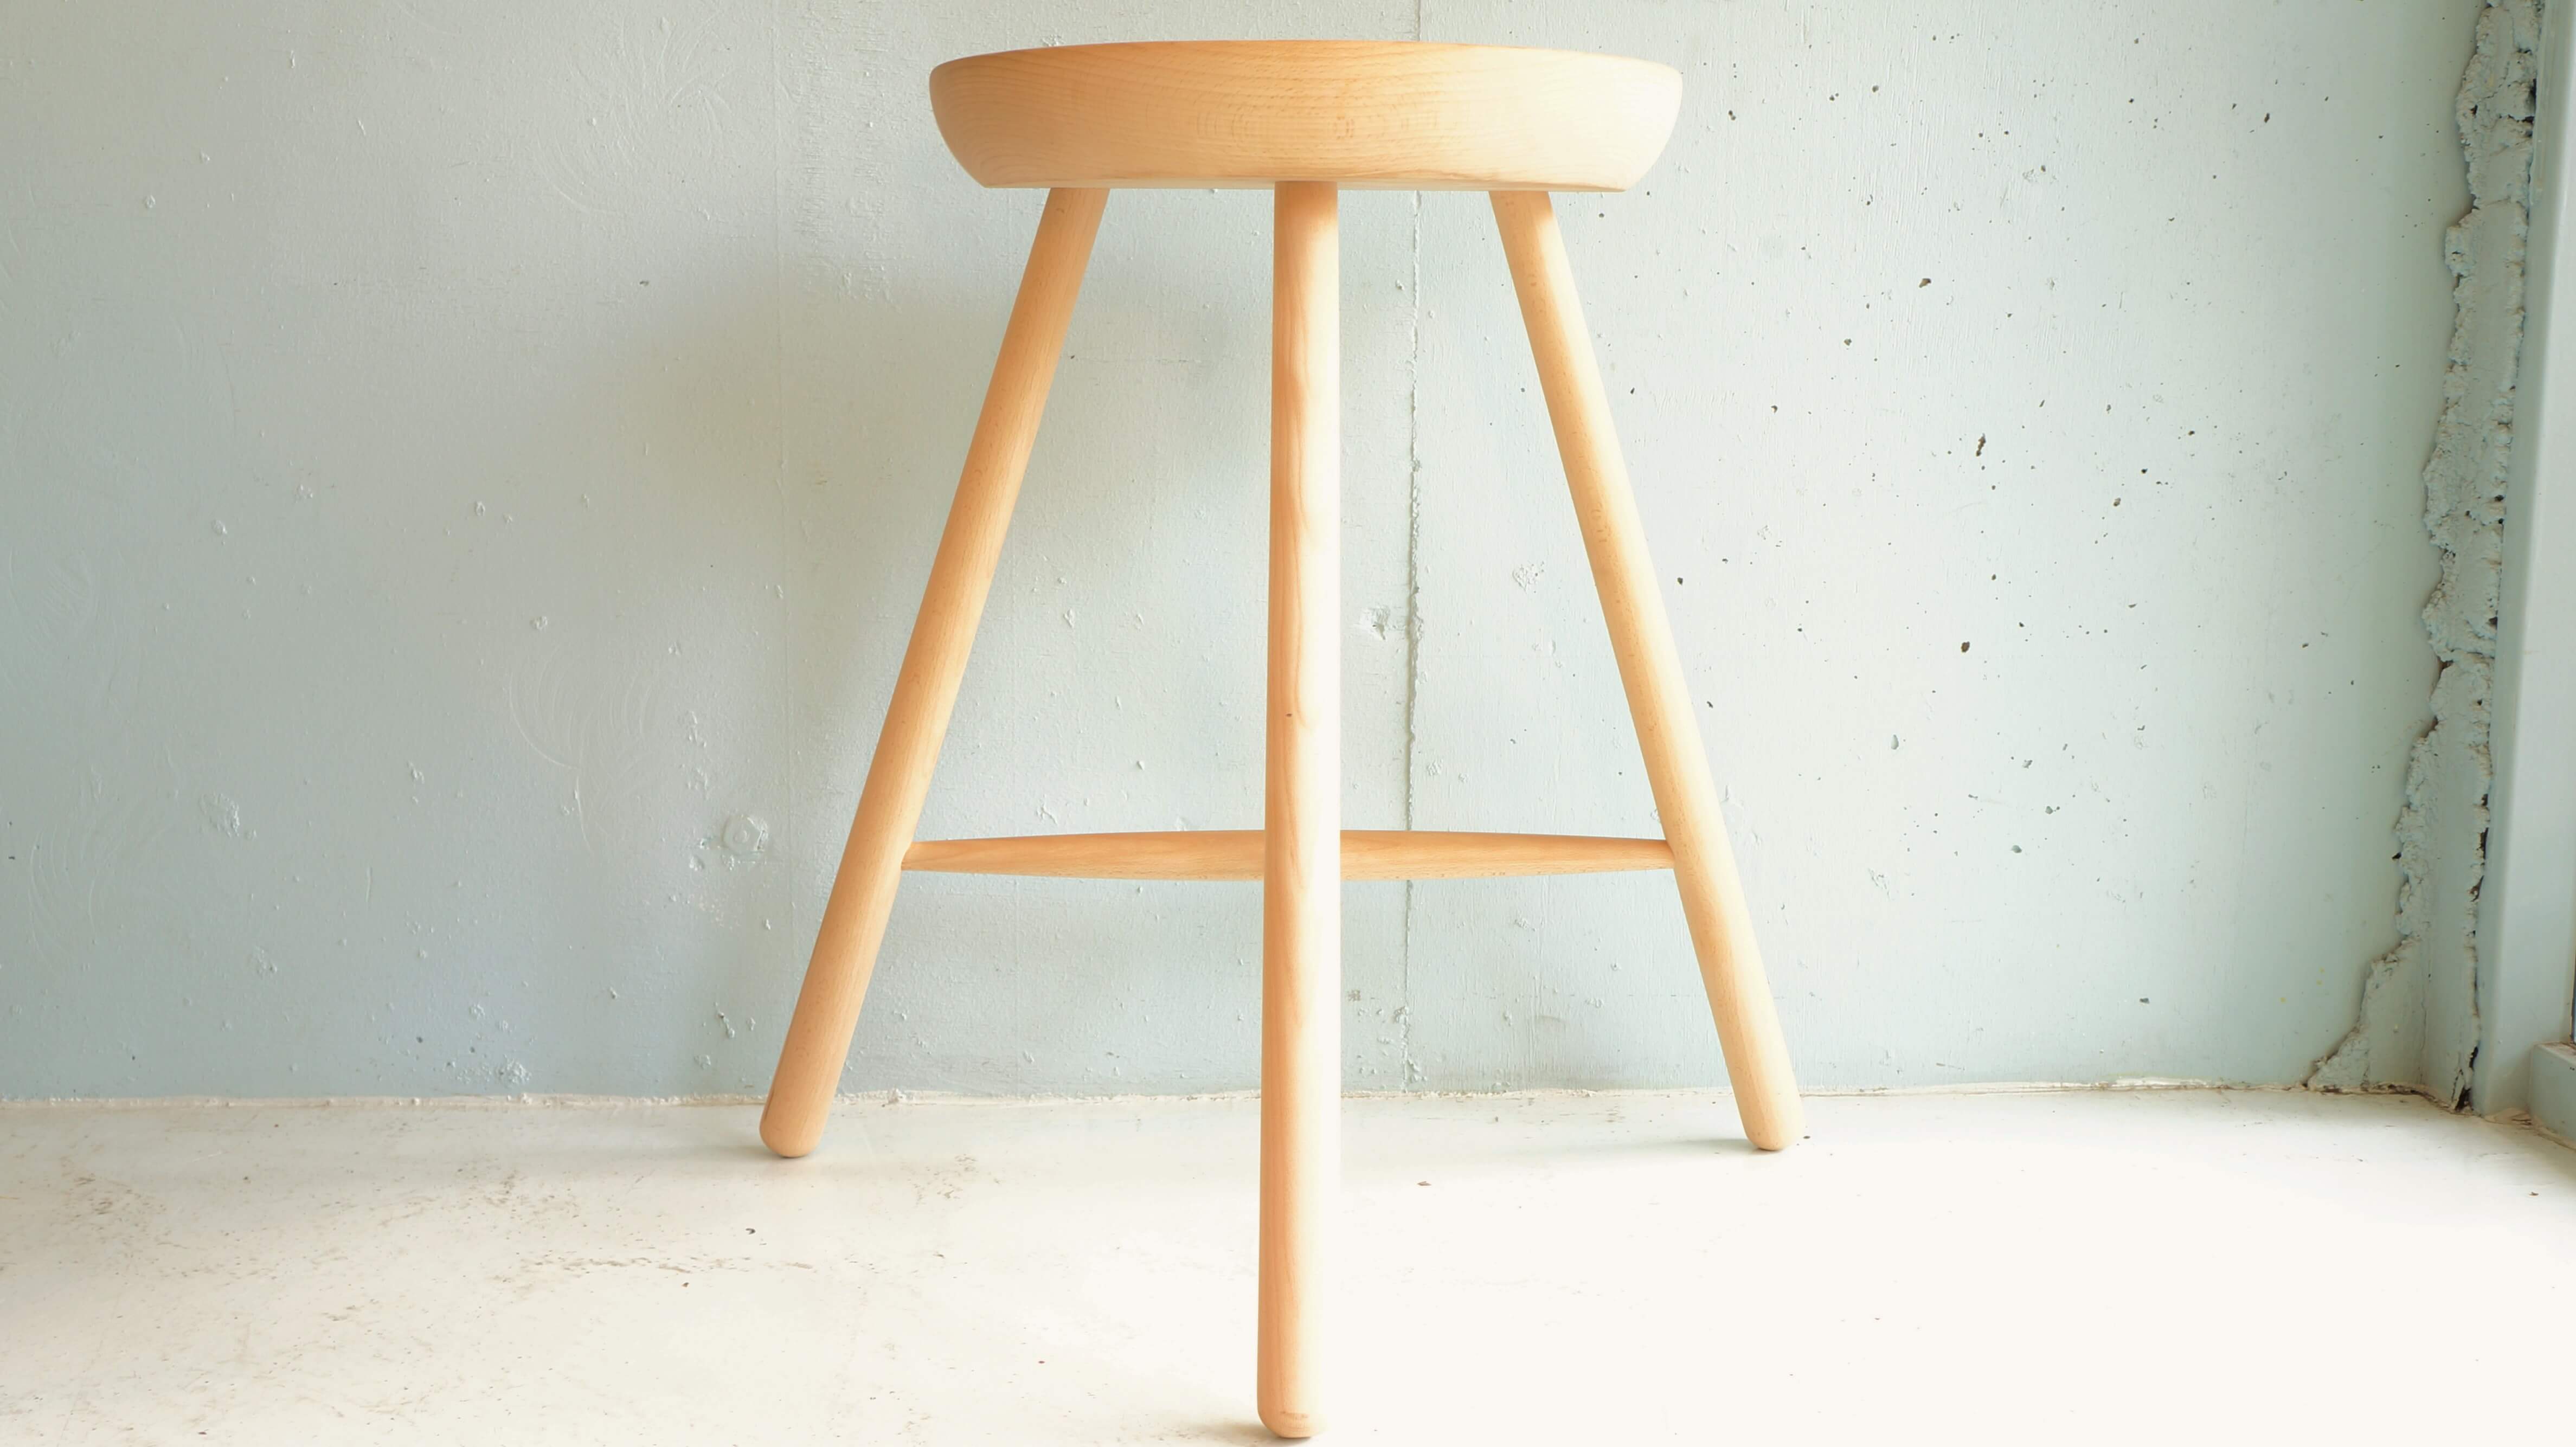 werner Shoemaker Chair stool made in Denmark/ワーナー シューメーカーチェア スツール デンマーク